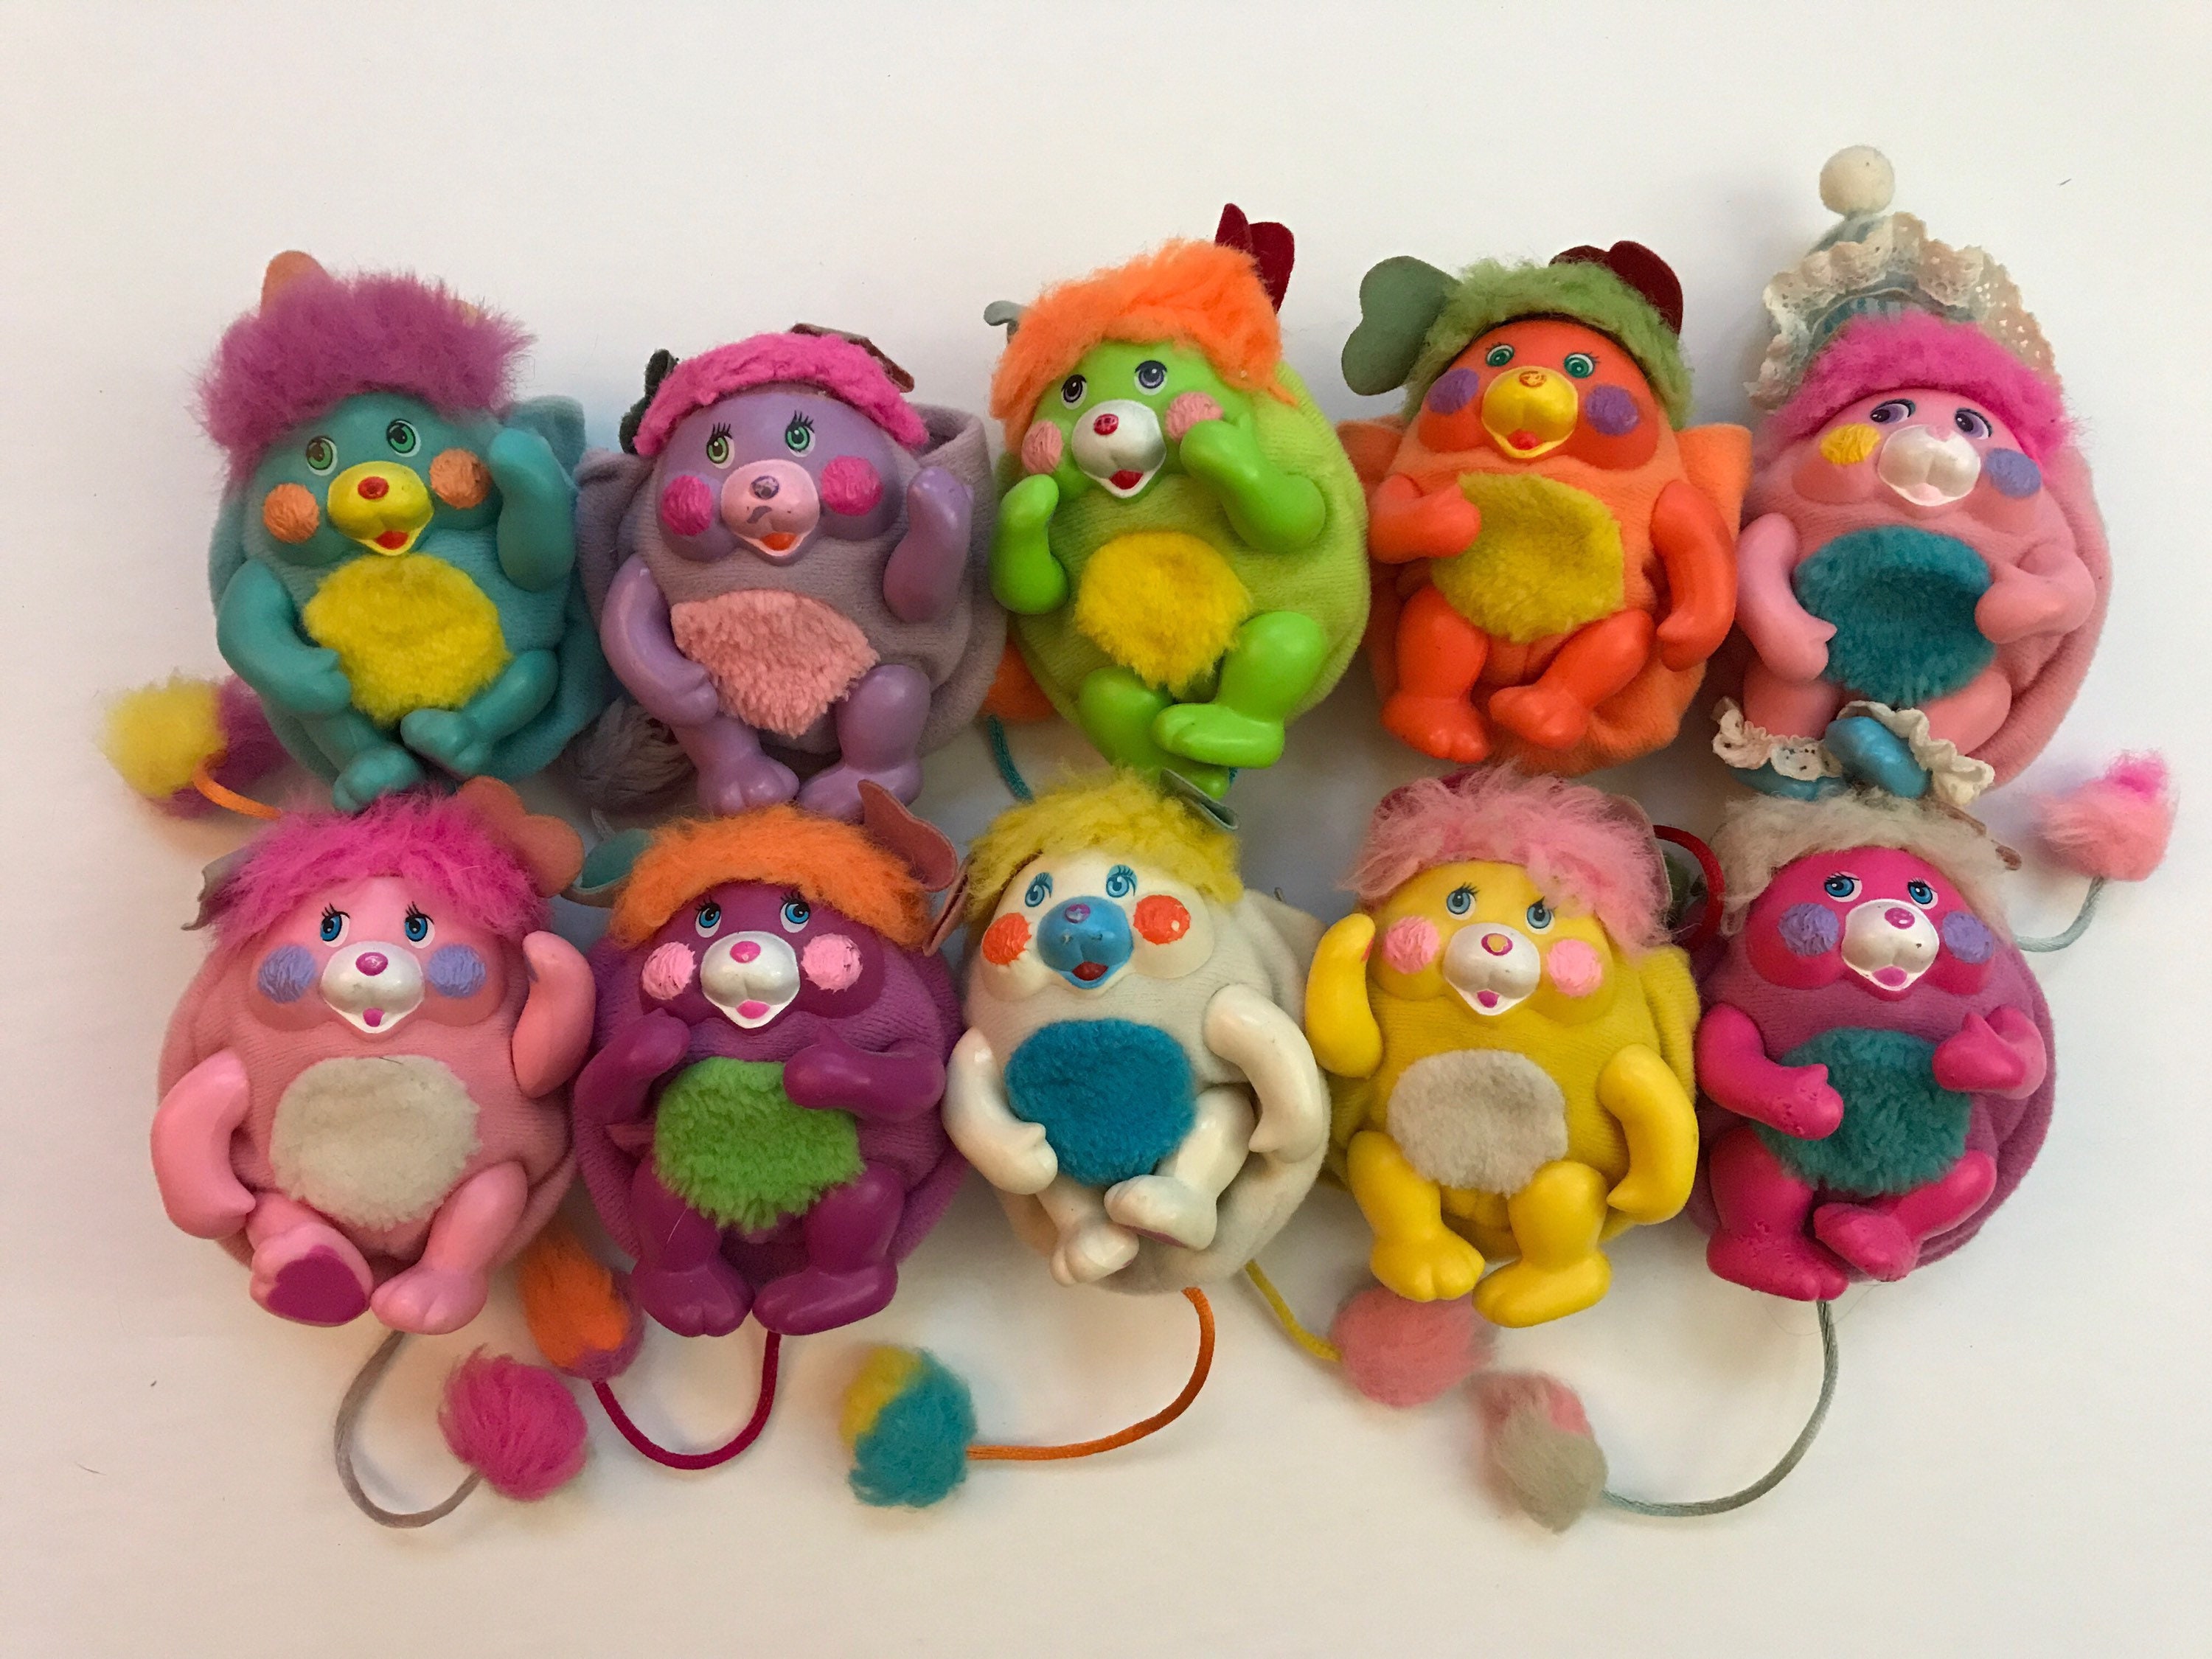 Pocket Popples Complete Set of 10 Mini Plush Small Stuffed Animals 1985 80s  Kids Toys Collectible